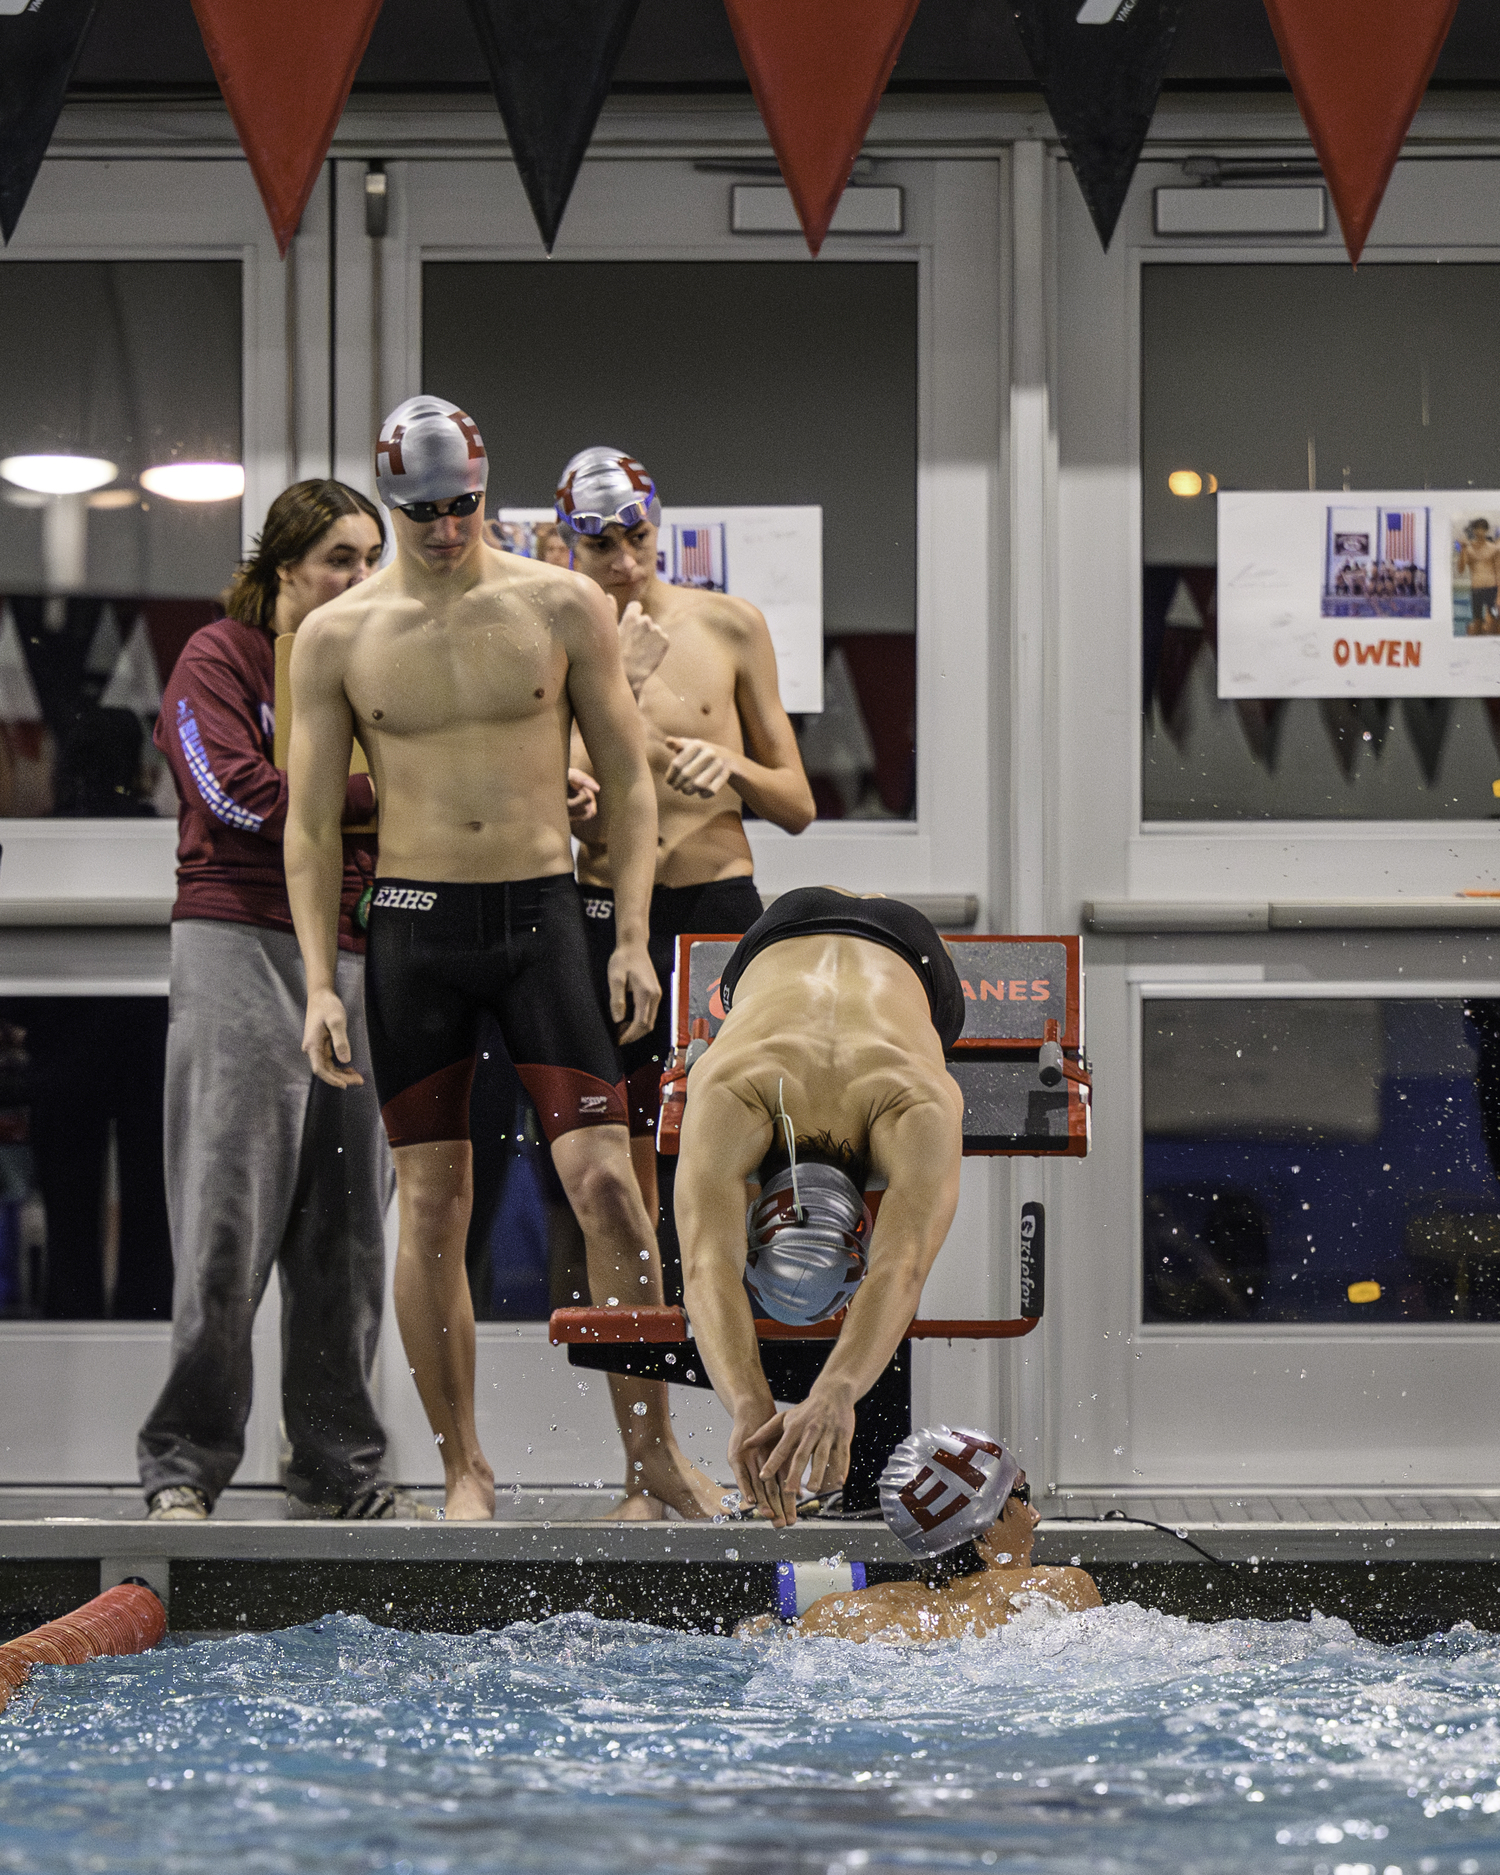 East Hampton sophomore Zeb Ryan waits his turn as senior Owen Robins jumps into the water as part o the 400-yard freestyle relay team that placed first in 4:12.14. MARIANNE BARNETT